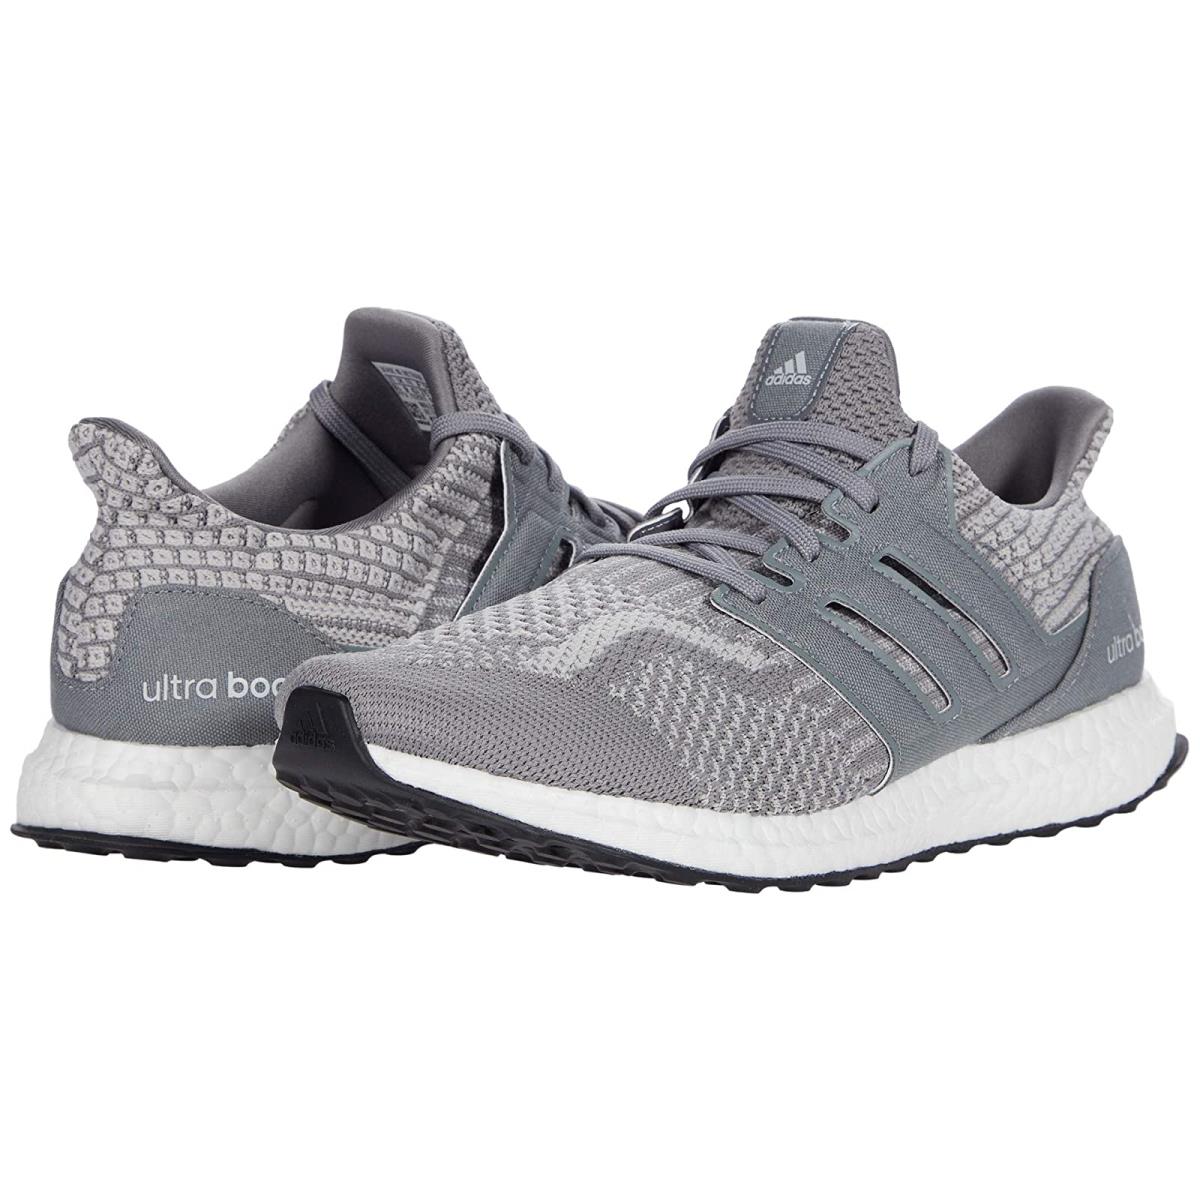 Man`s Sneakers Athletic Shoes Adidas Running Ultraboost Dna Primeblue Grey/Grey/Black